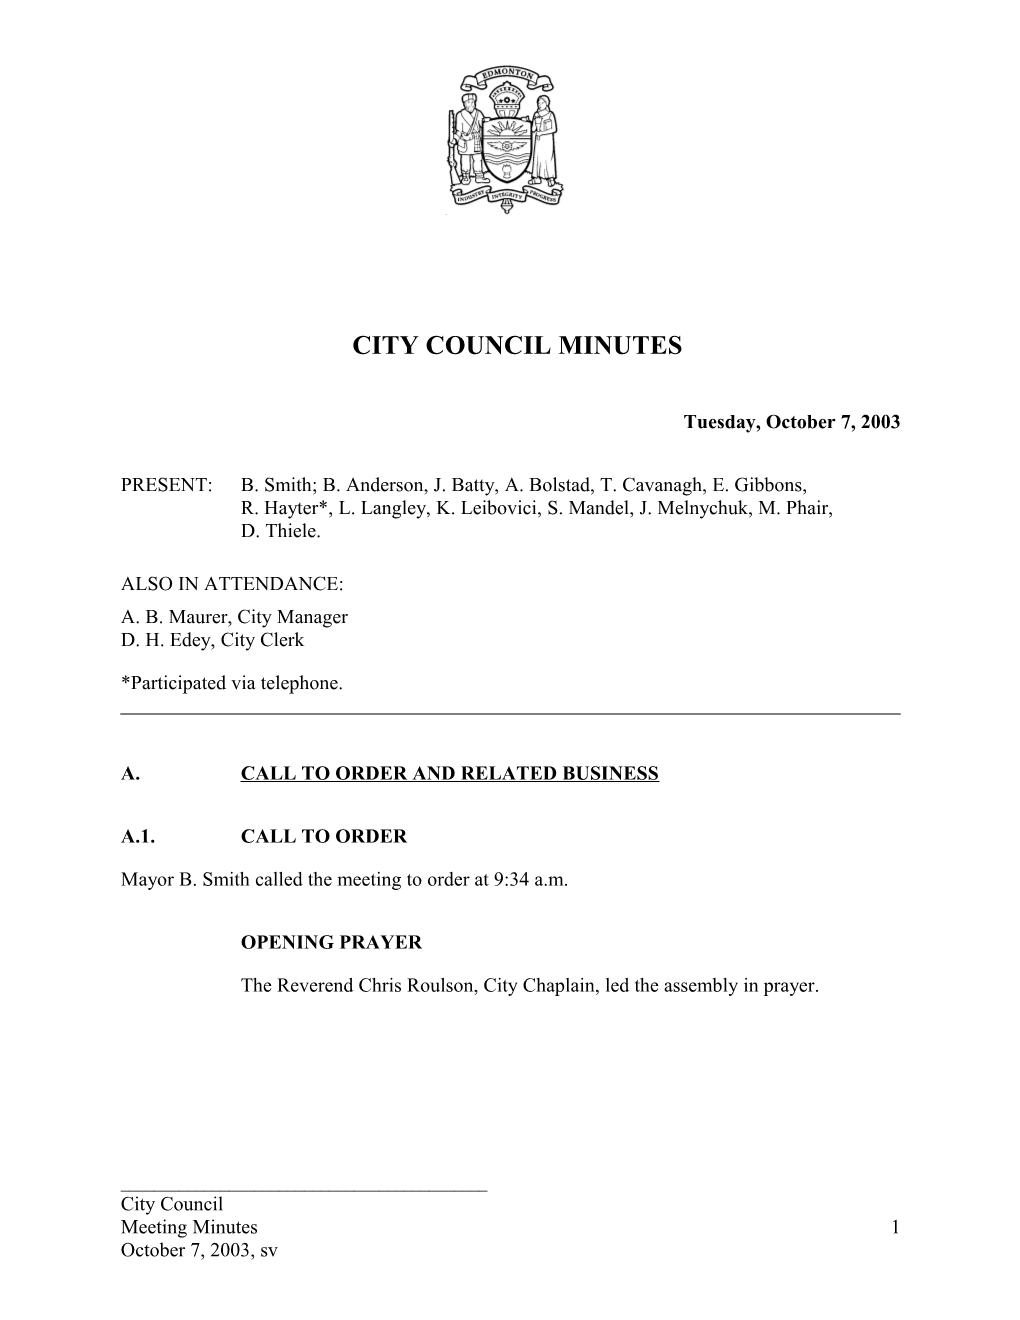 Minutes for City Council October 7, 2003 Meeting